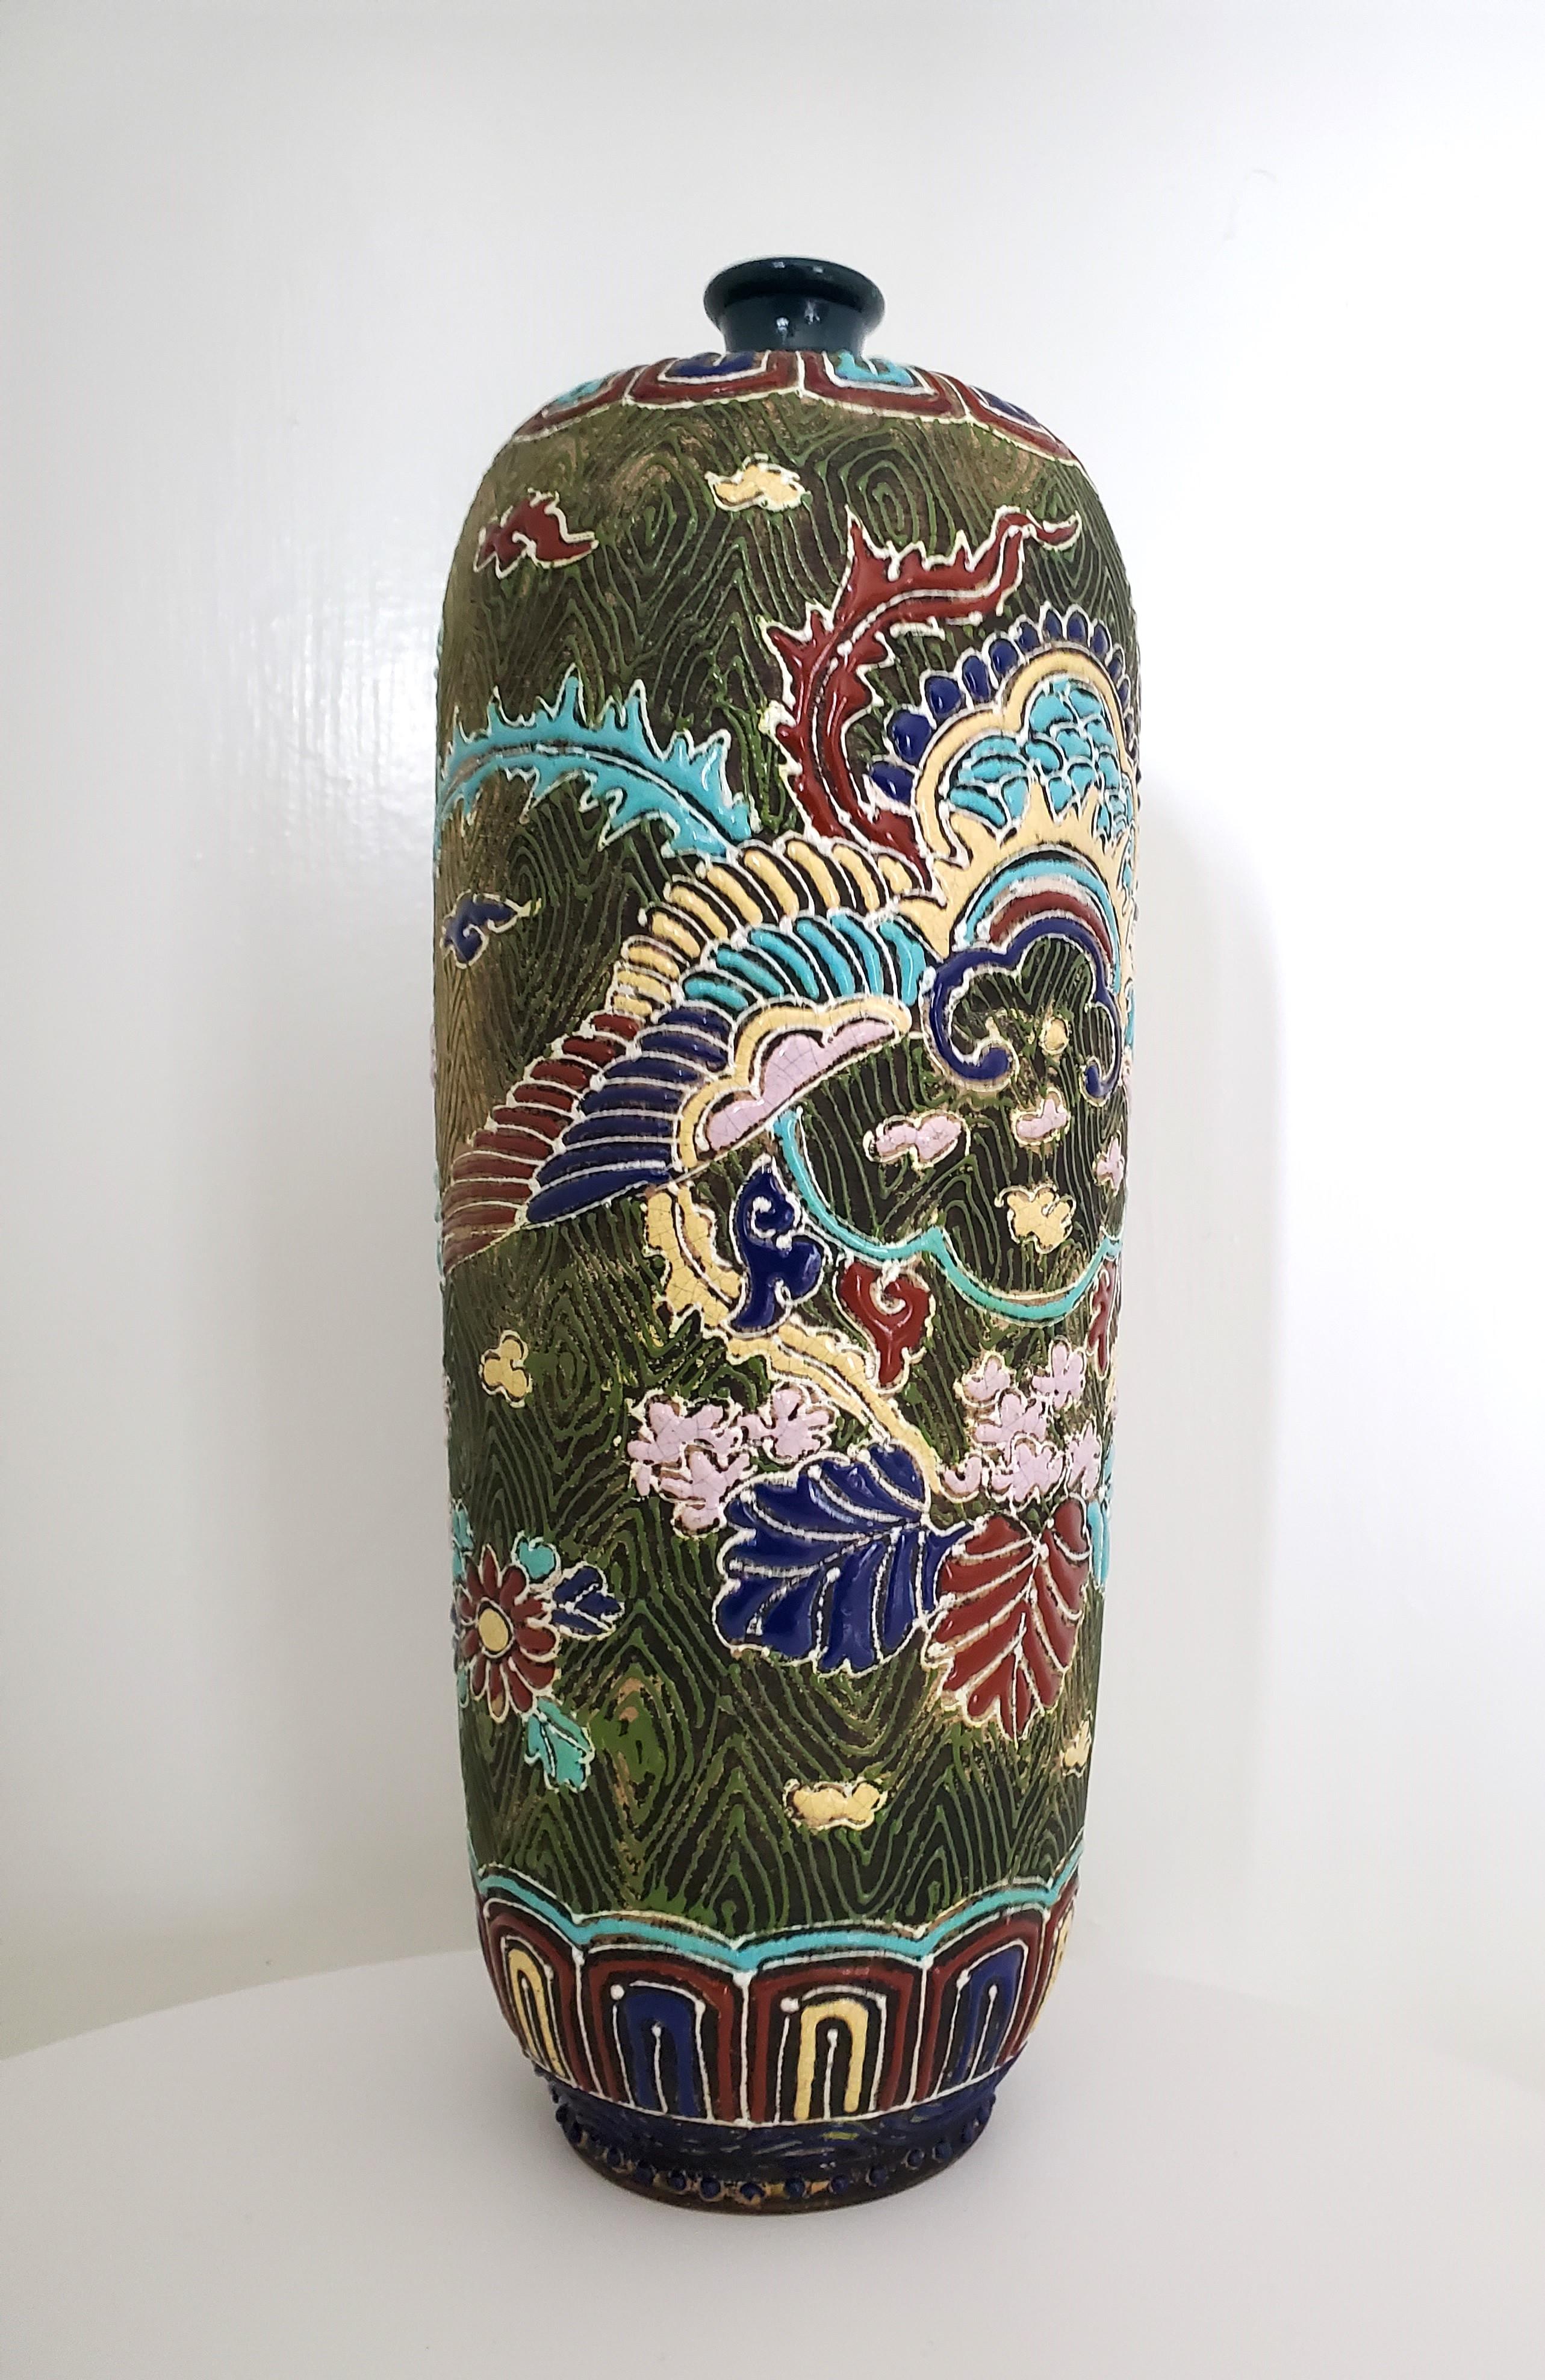 This unique hand-enamelled earthenware sleeve vase is decorated in enamel relief of an archaistic style with clouds, flowers, leaves, and an abstract rendering of a phoenix. The main body is dark green with a dark olive-green slip enamel pattern.